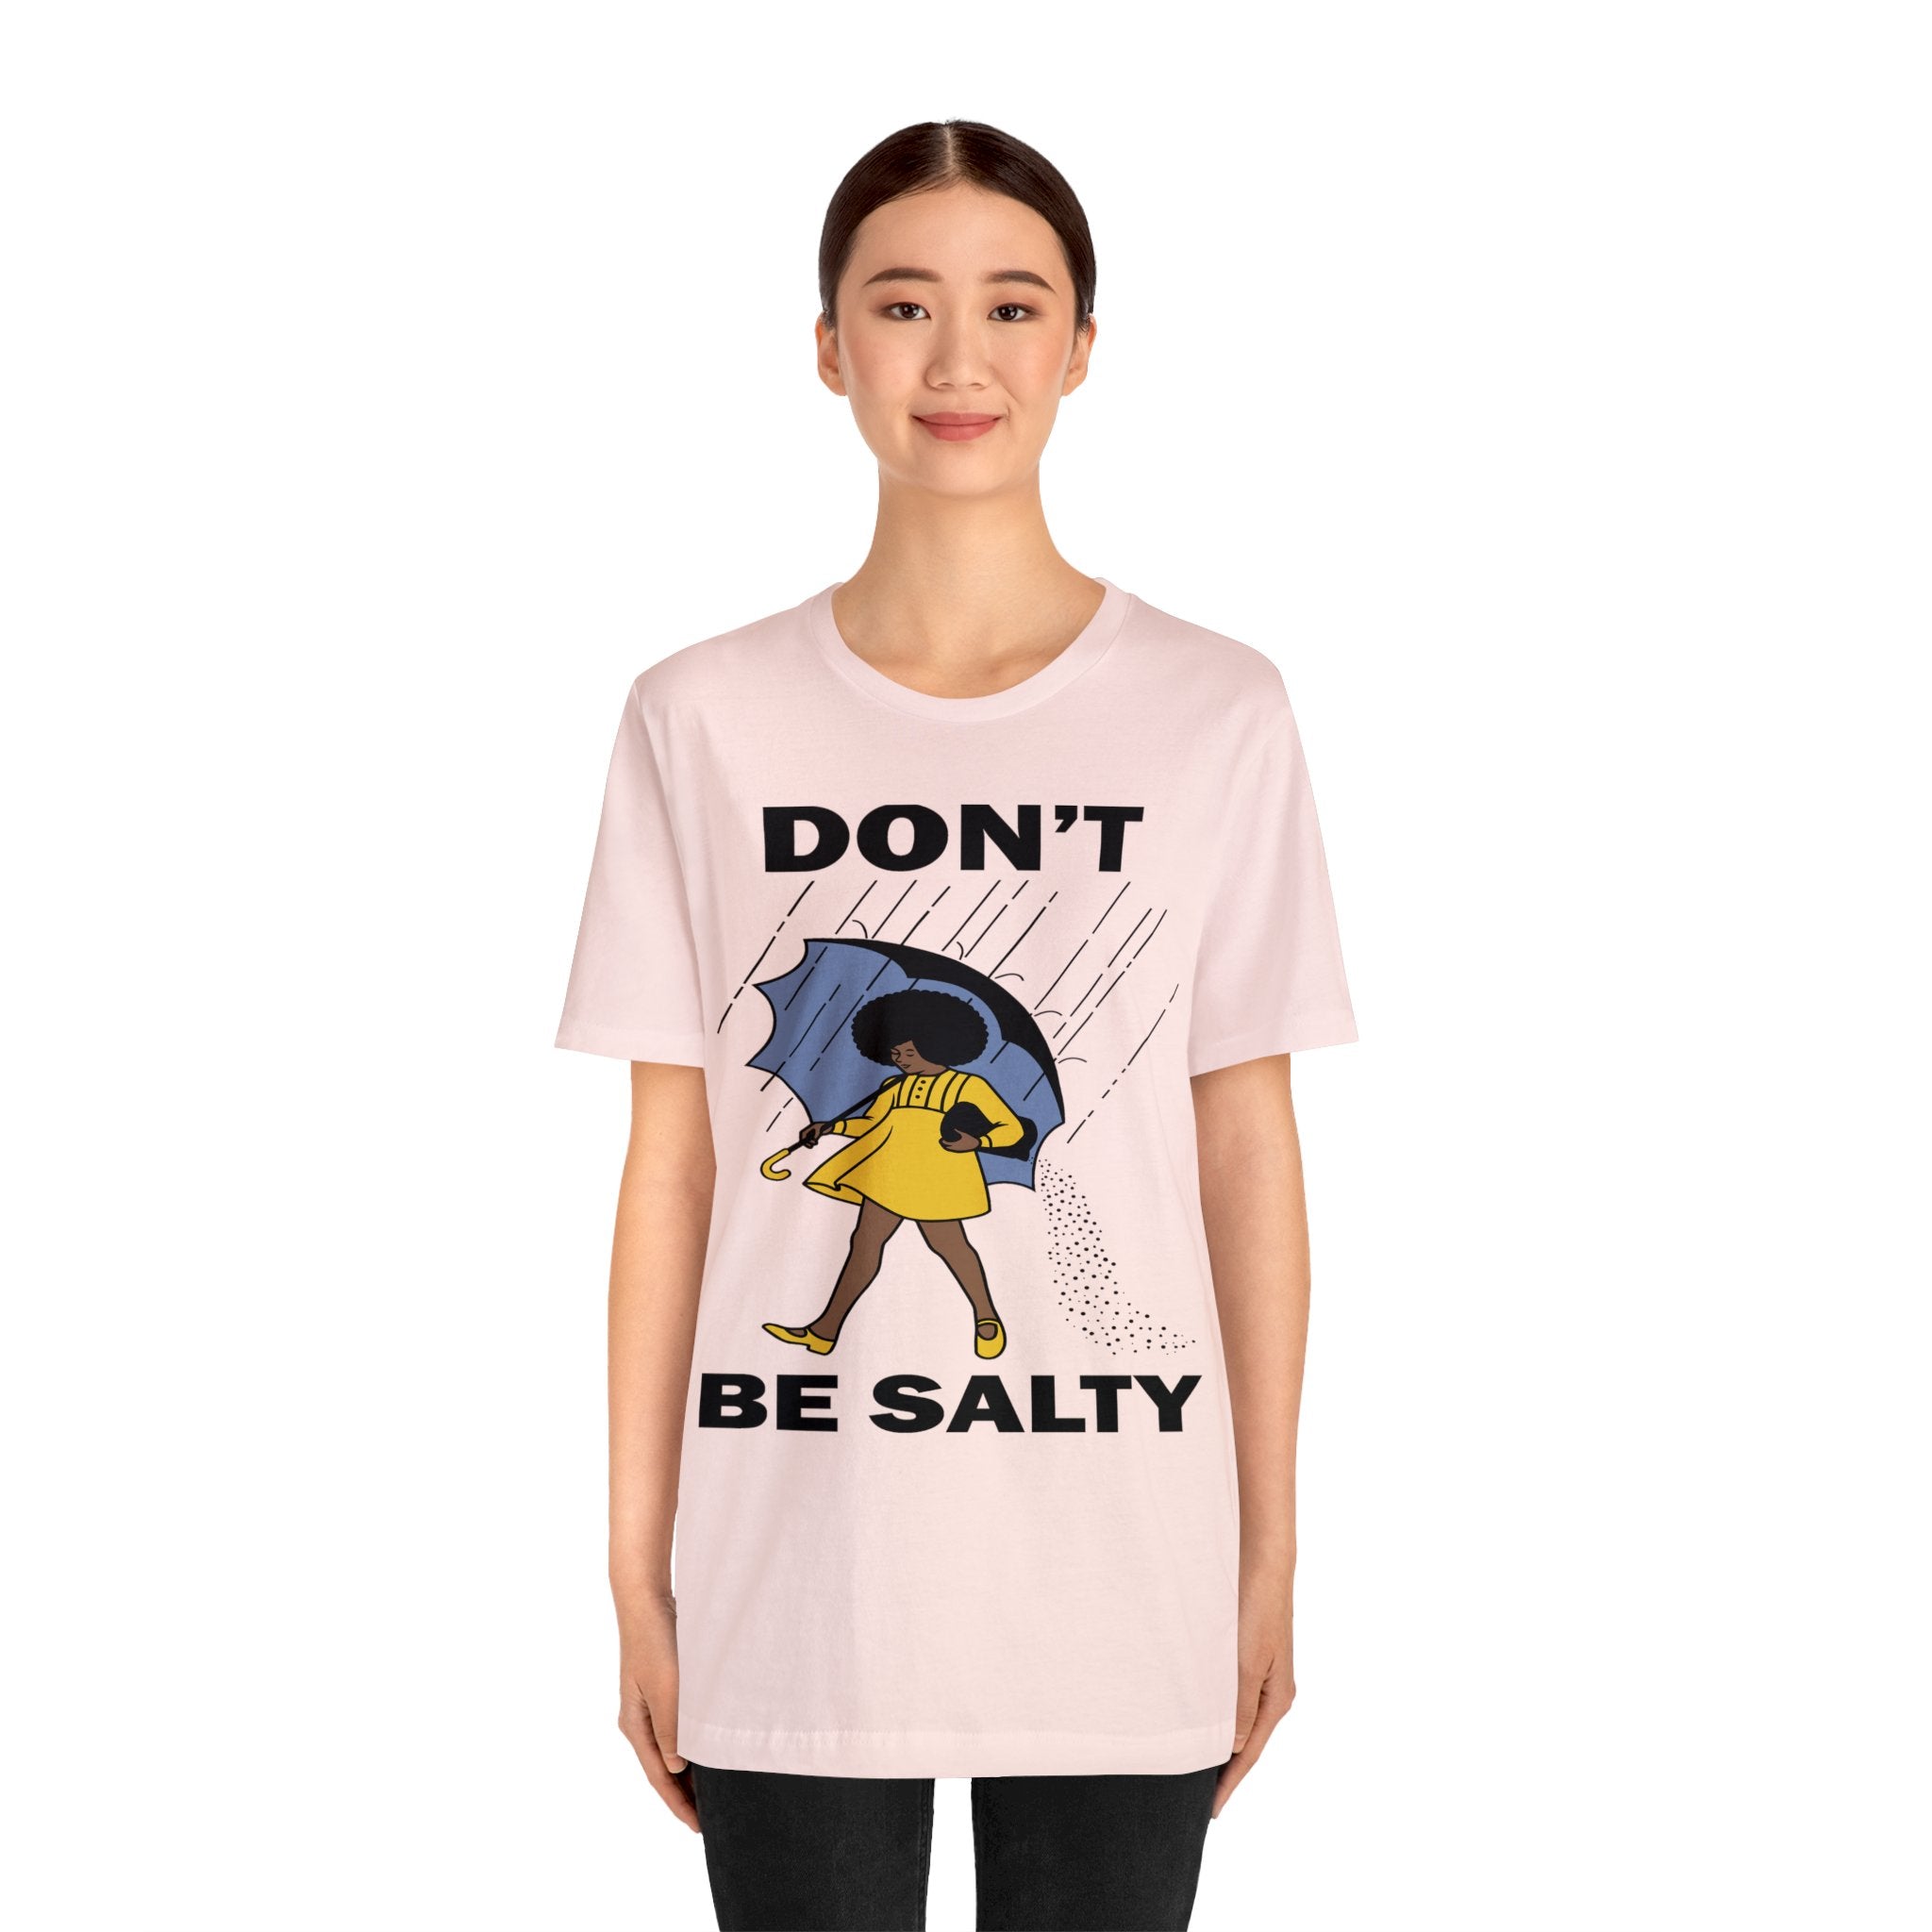 Don't Be Salty Shirt